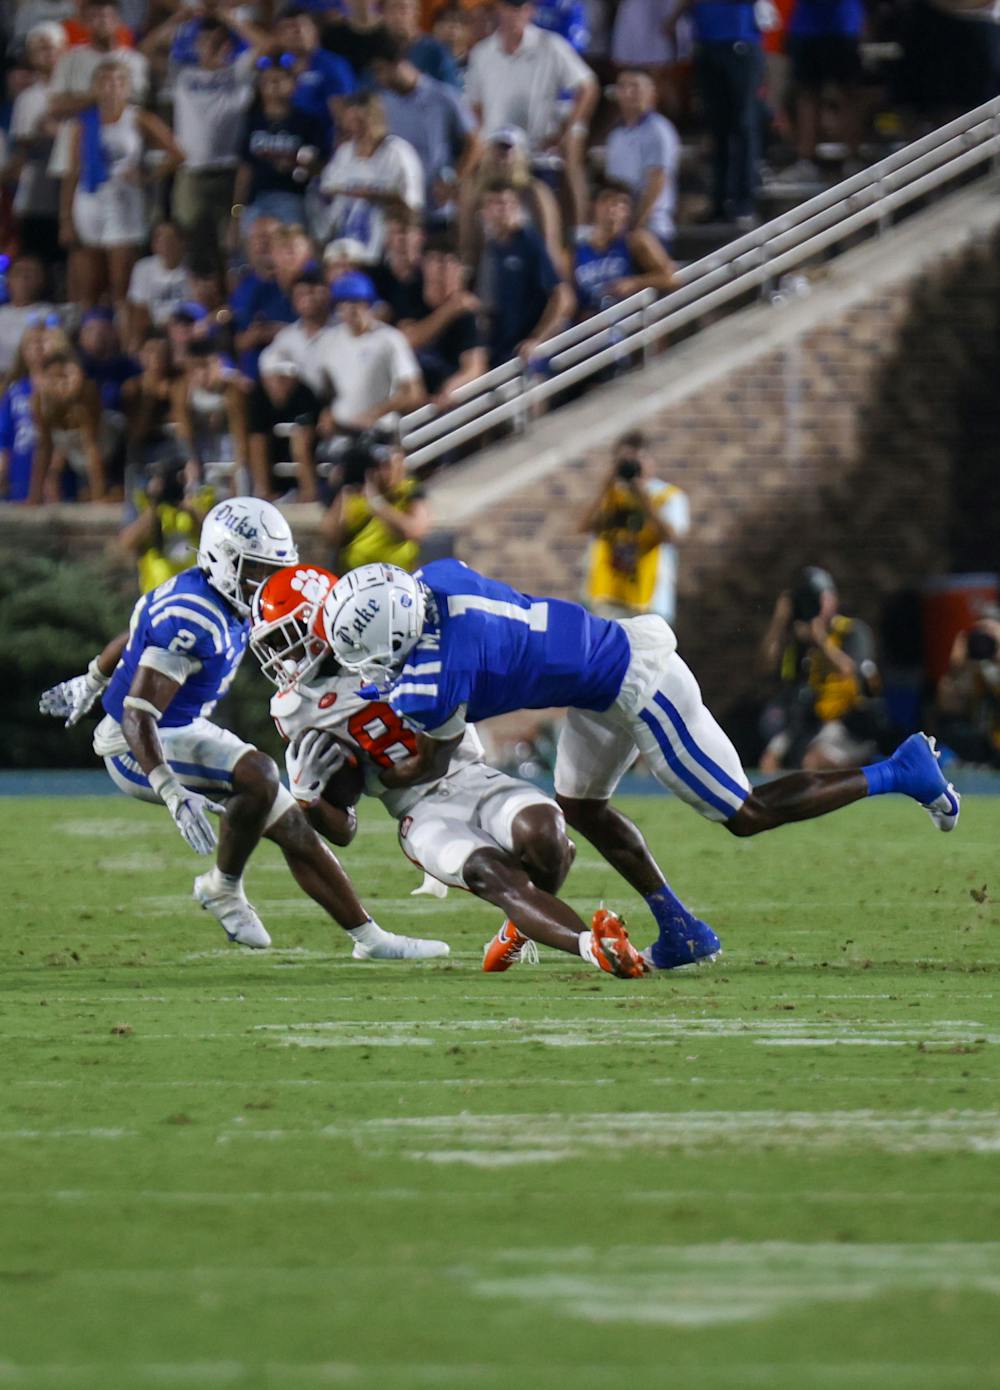 Duke football opened with a convincing defeat of Clemson, in large part due to the stifling defensive effort. 